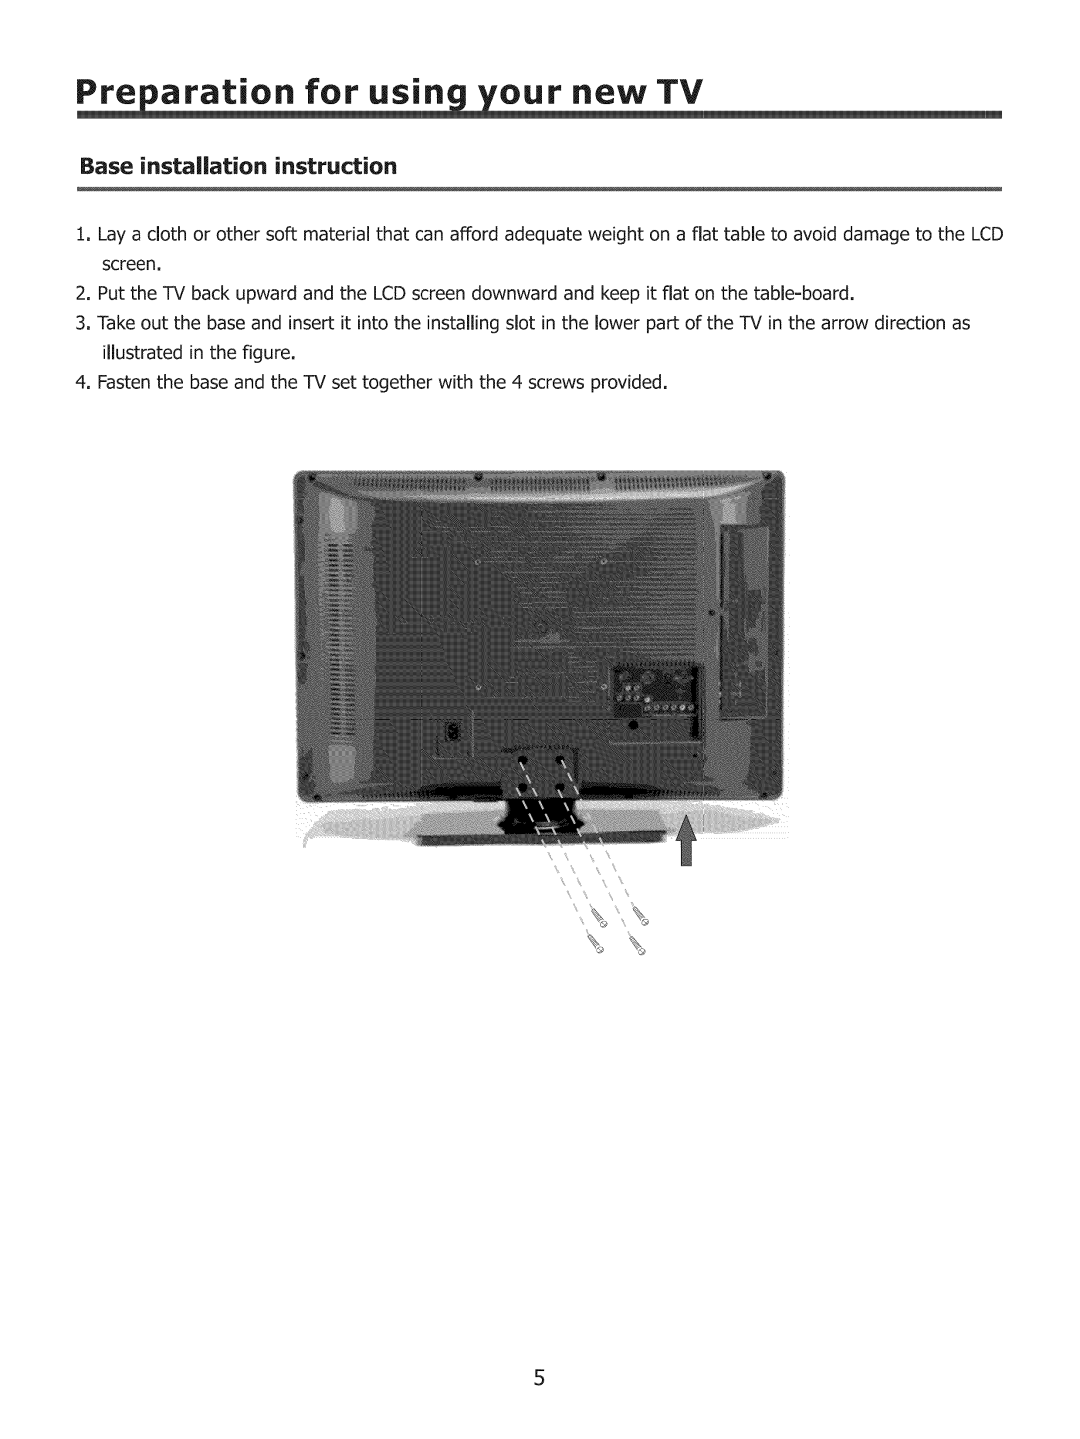 ProScan 37LC30S57 user manual ration for usi, r new TV, Base installation instruction 